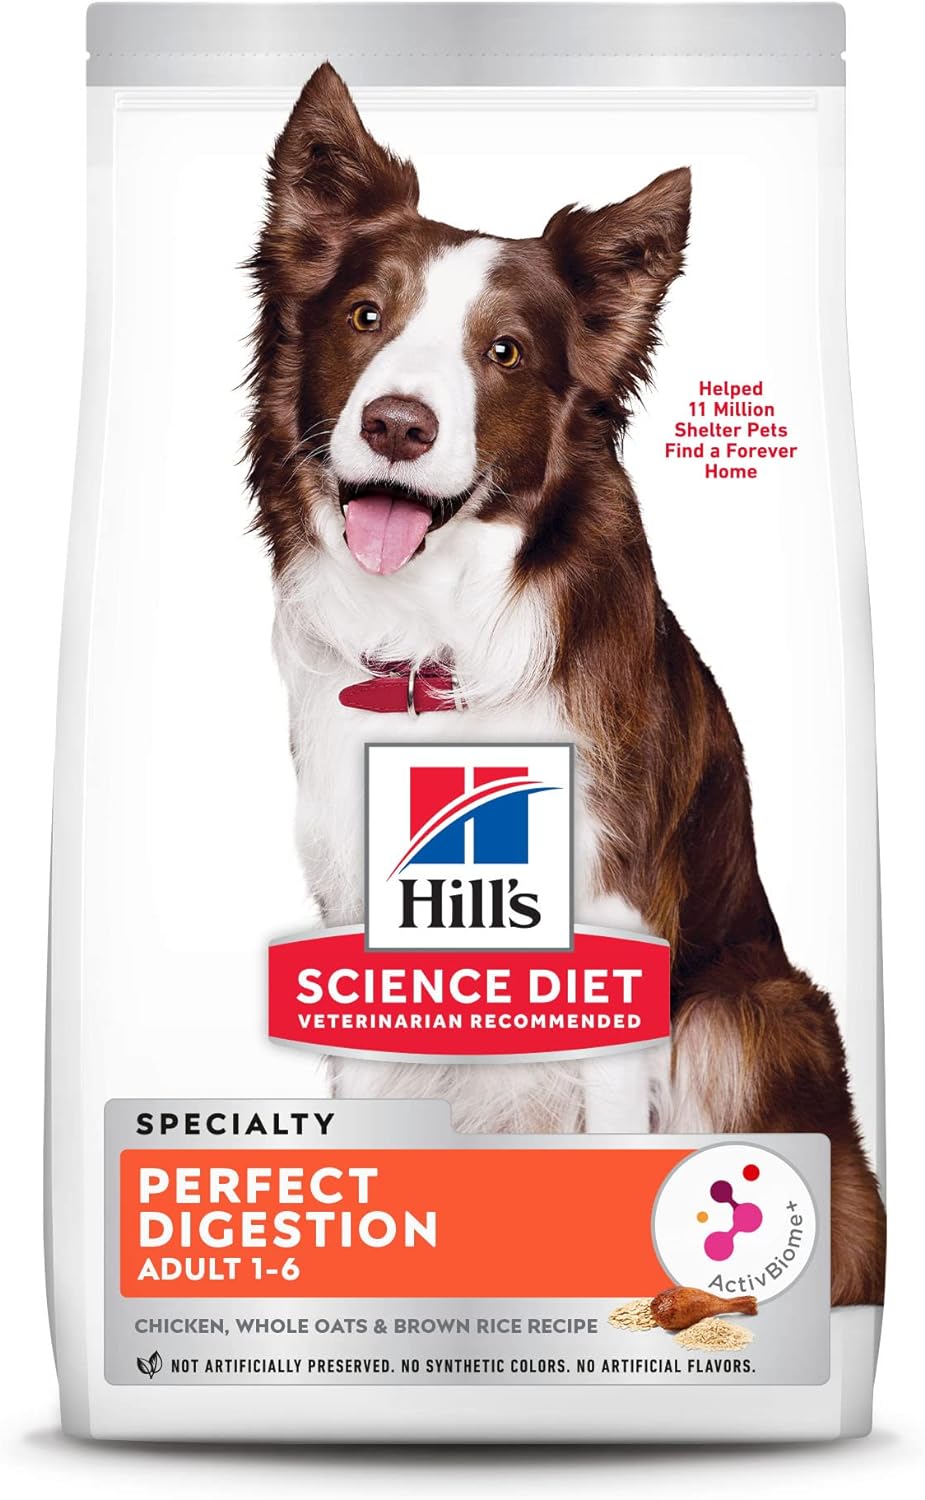 Hill’s Science Diet Adult Perfect Digestion Chicken, Brown Rice & Whole Oats Recipe Dry Dog Food – Gallery Image 1